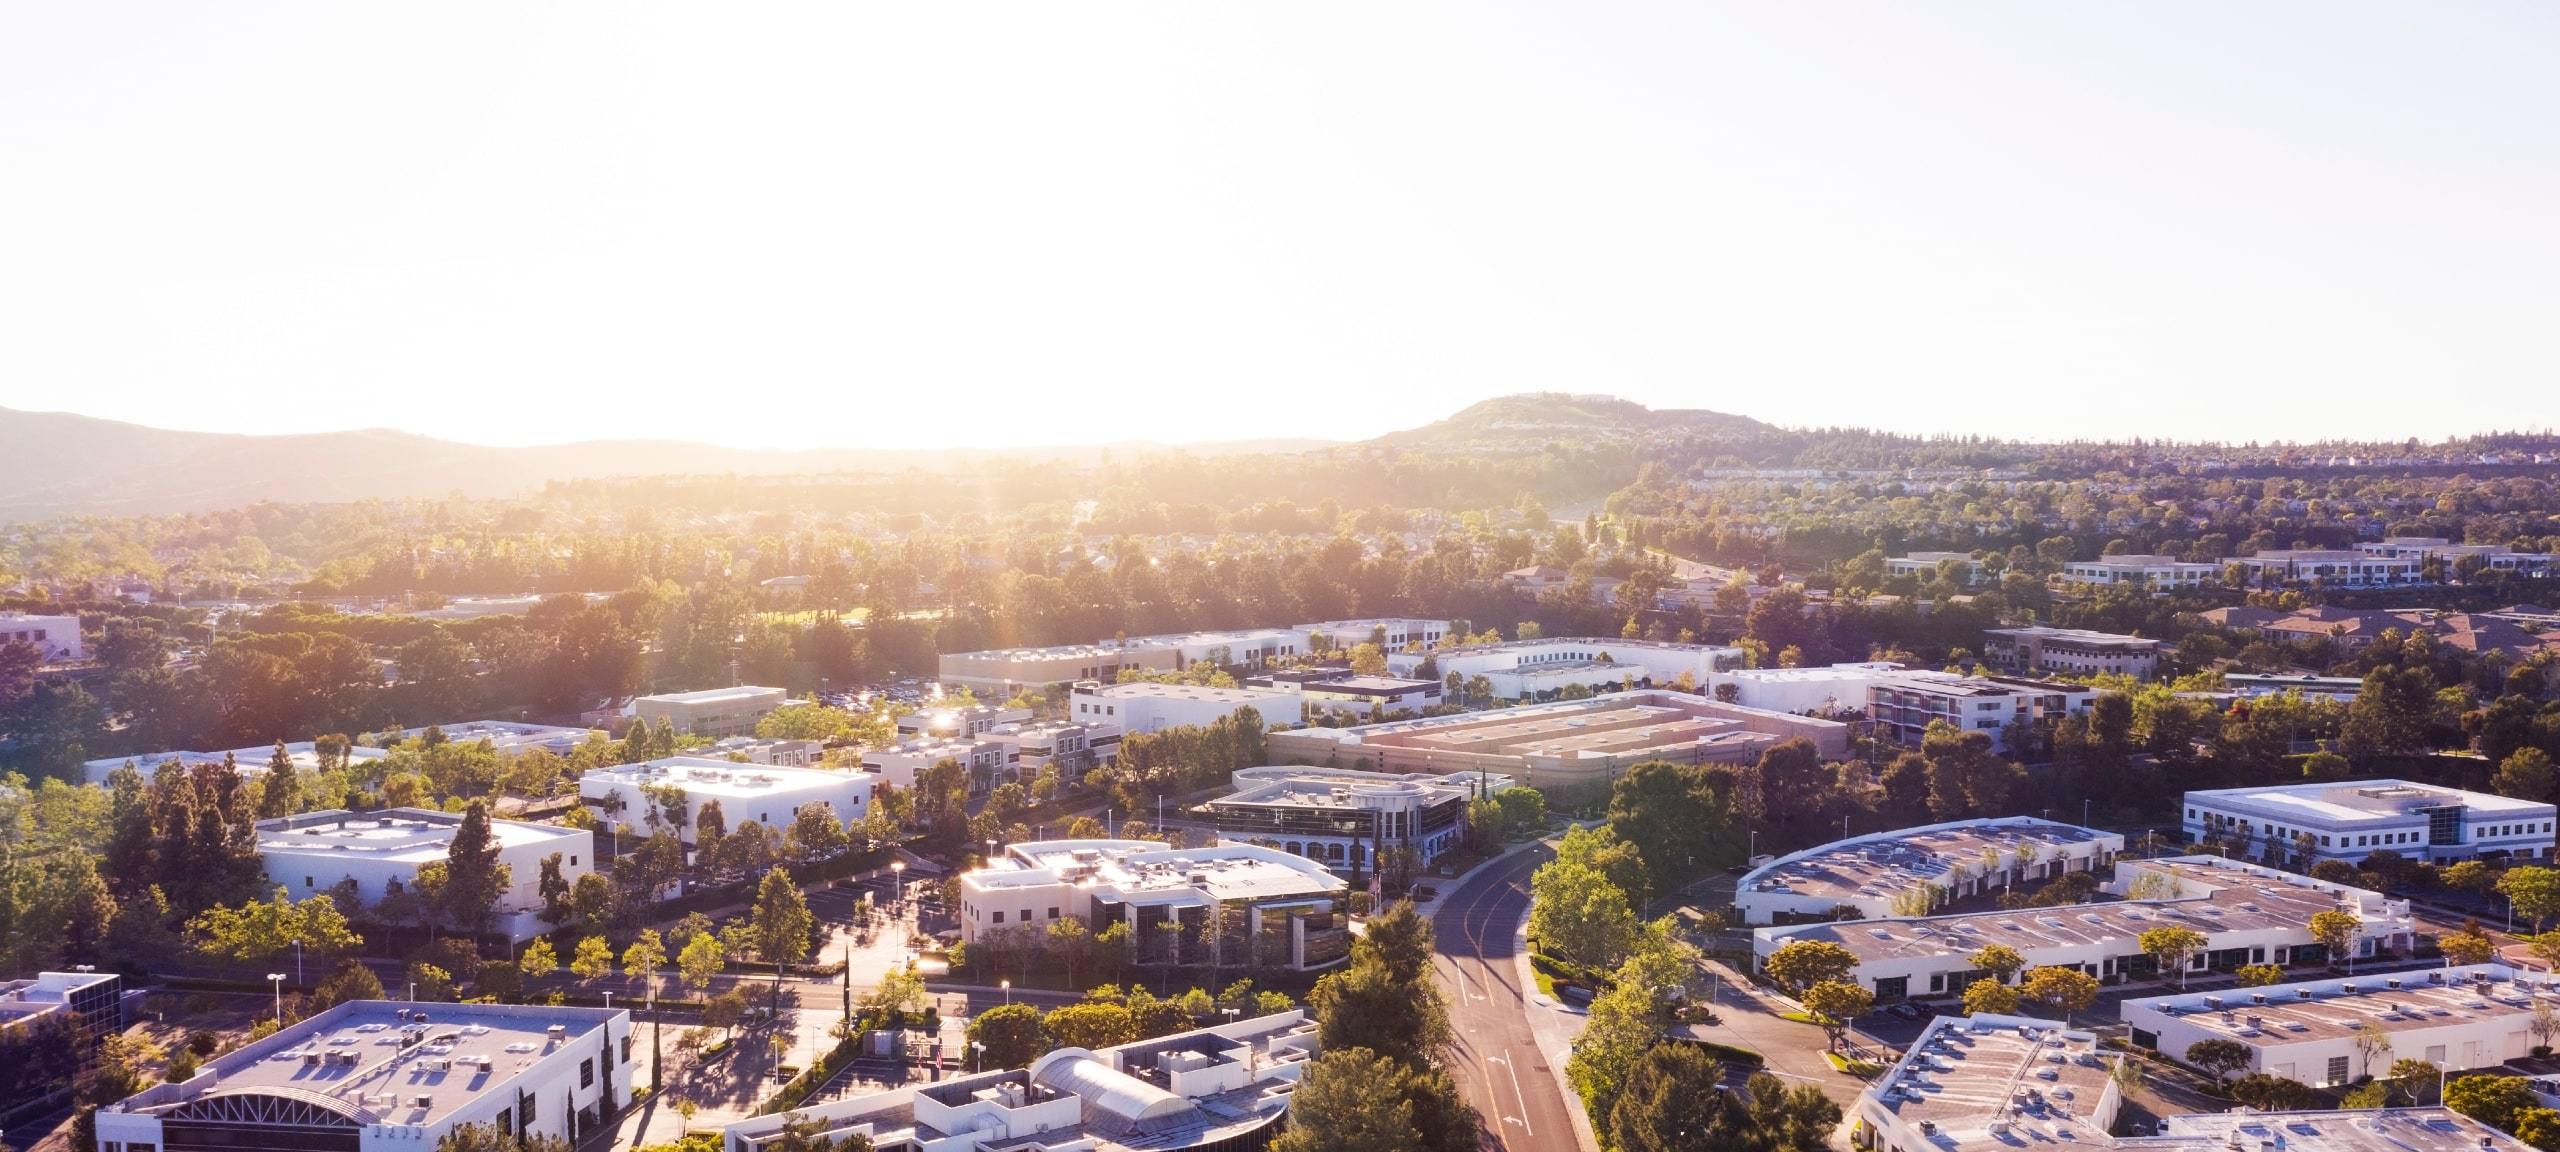 Aerial view of Aliso Viejo, CA business district